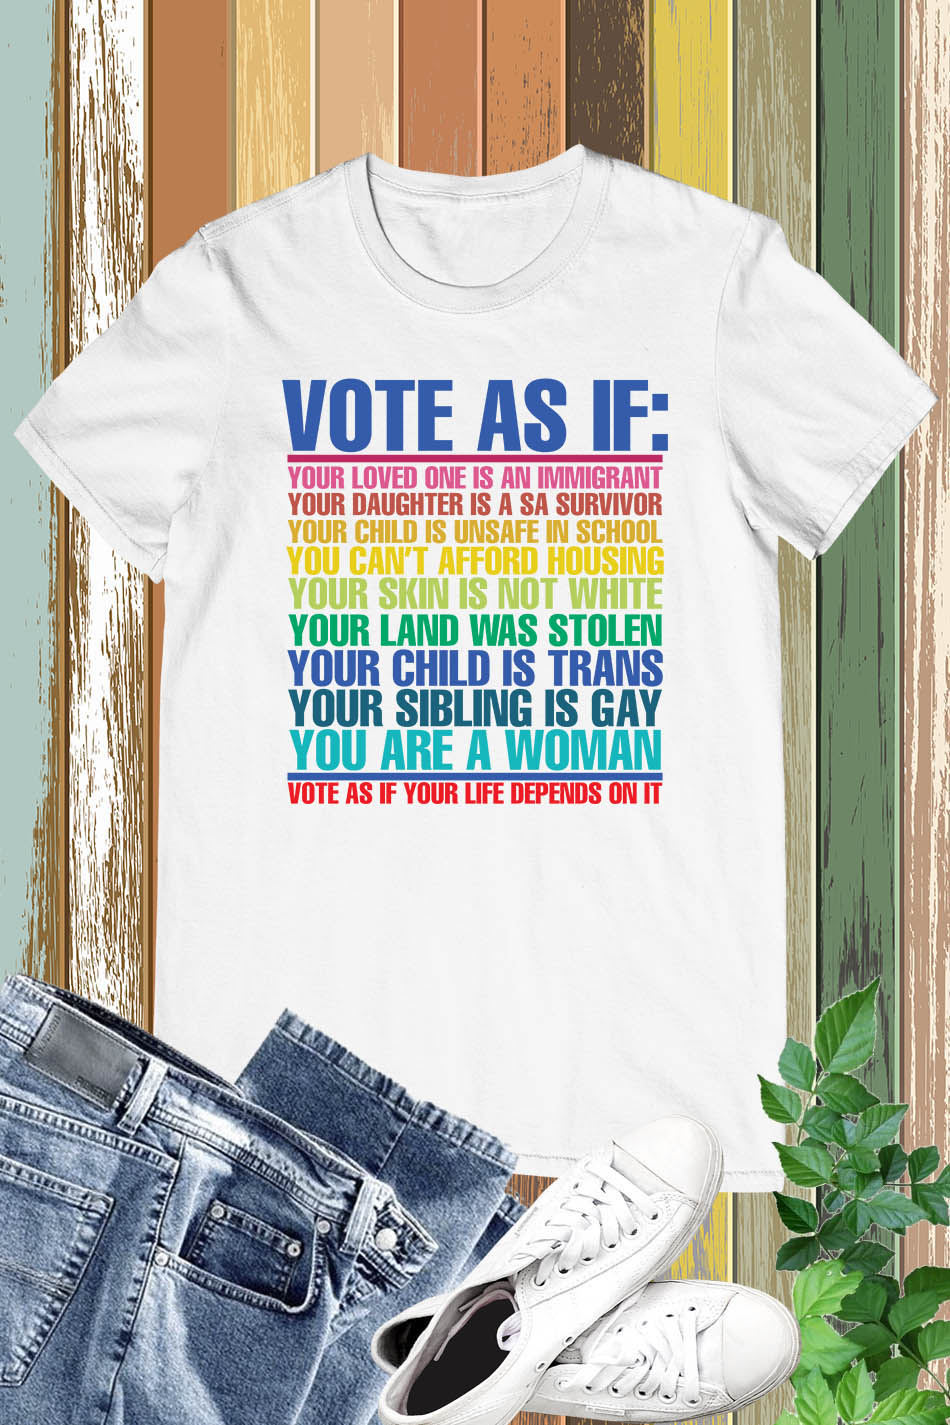 Vote As If Your Rights Depend On It" - Make a statement with our 'Vote As If' shirt! Every vote counts. 🗳️ #VoteAsIf #ElectionSeason #CivicResponsibility